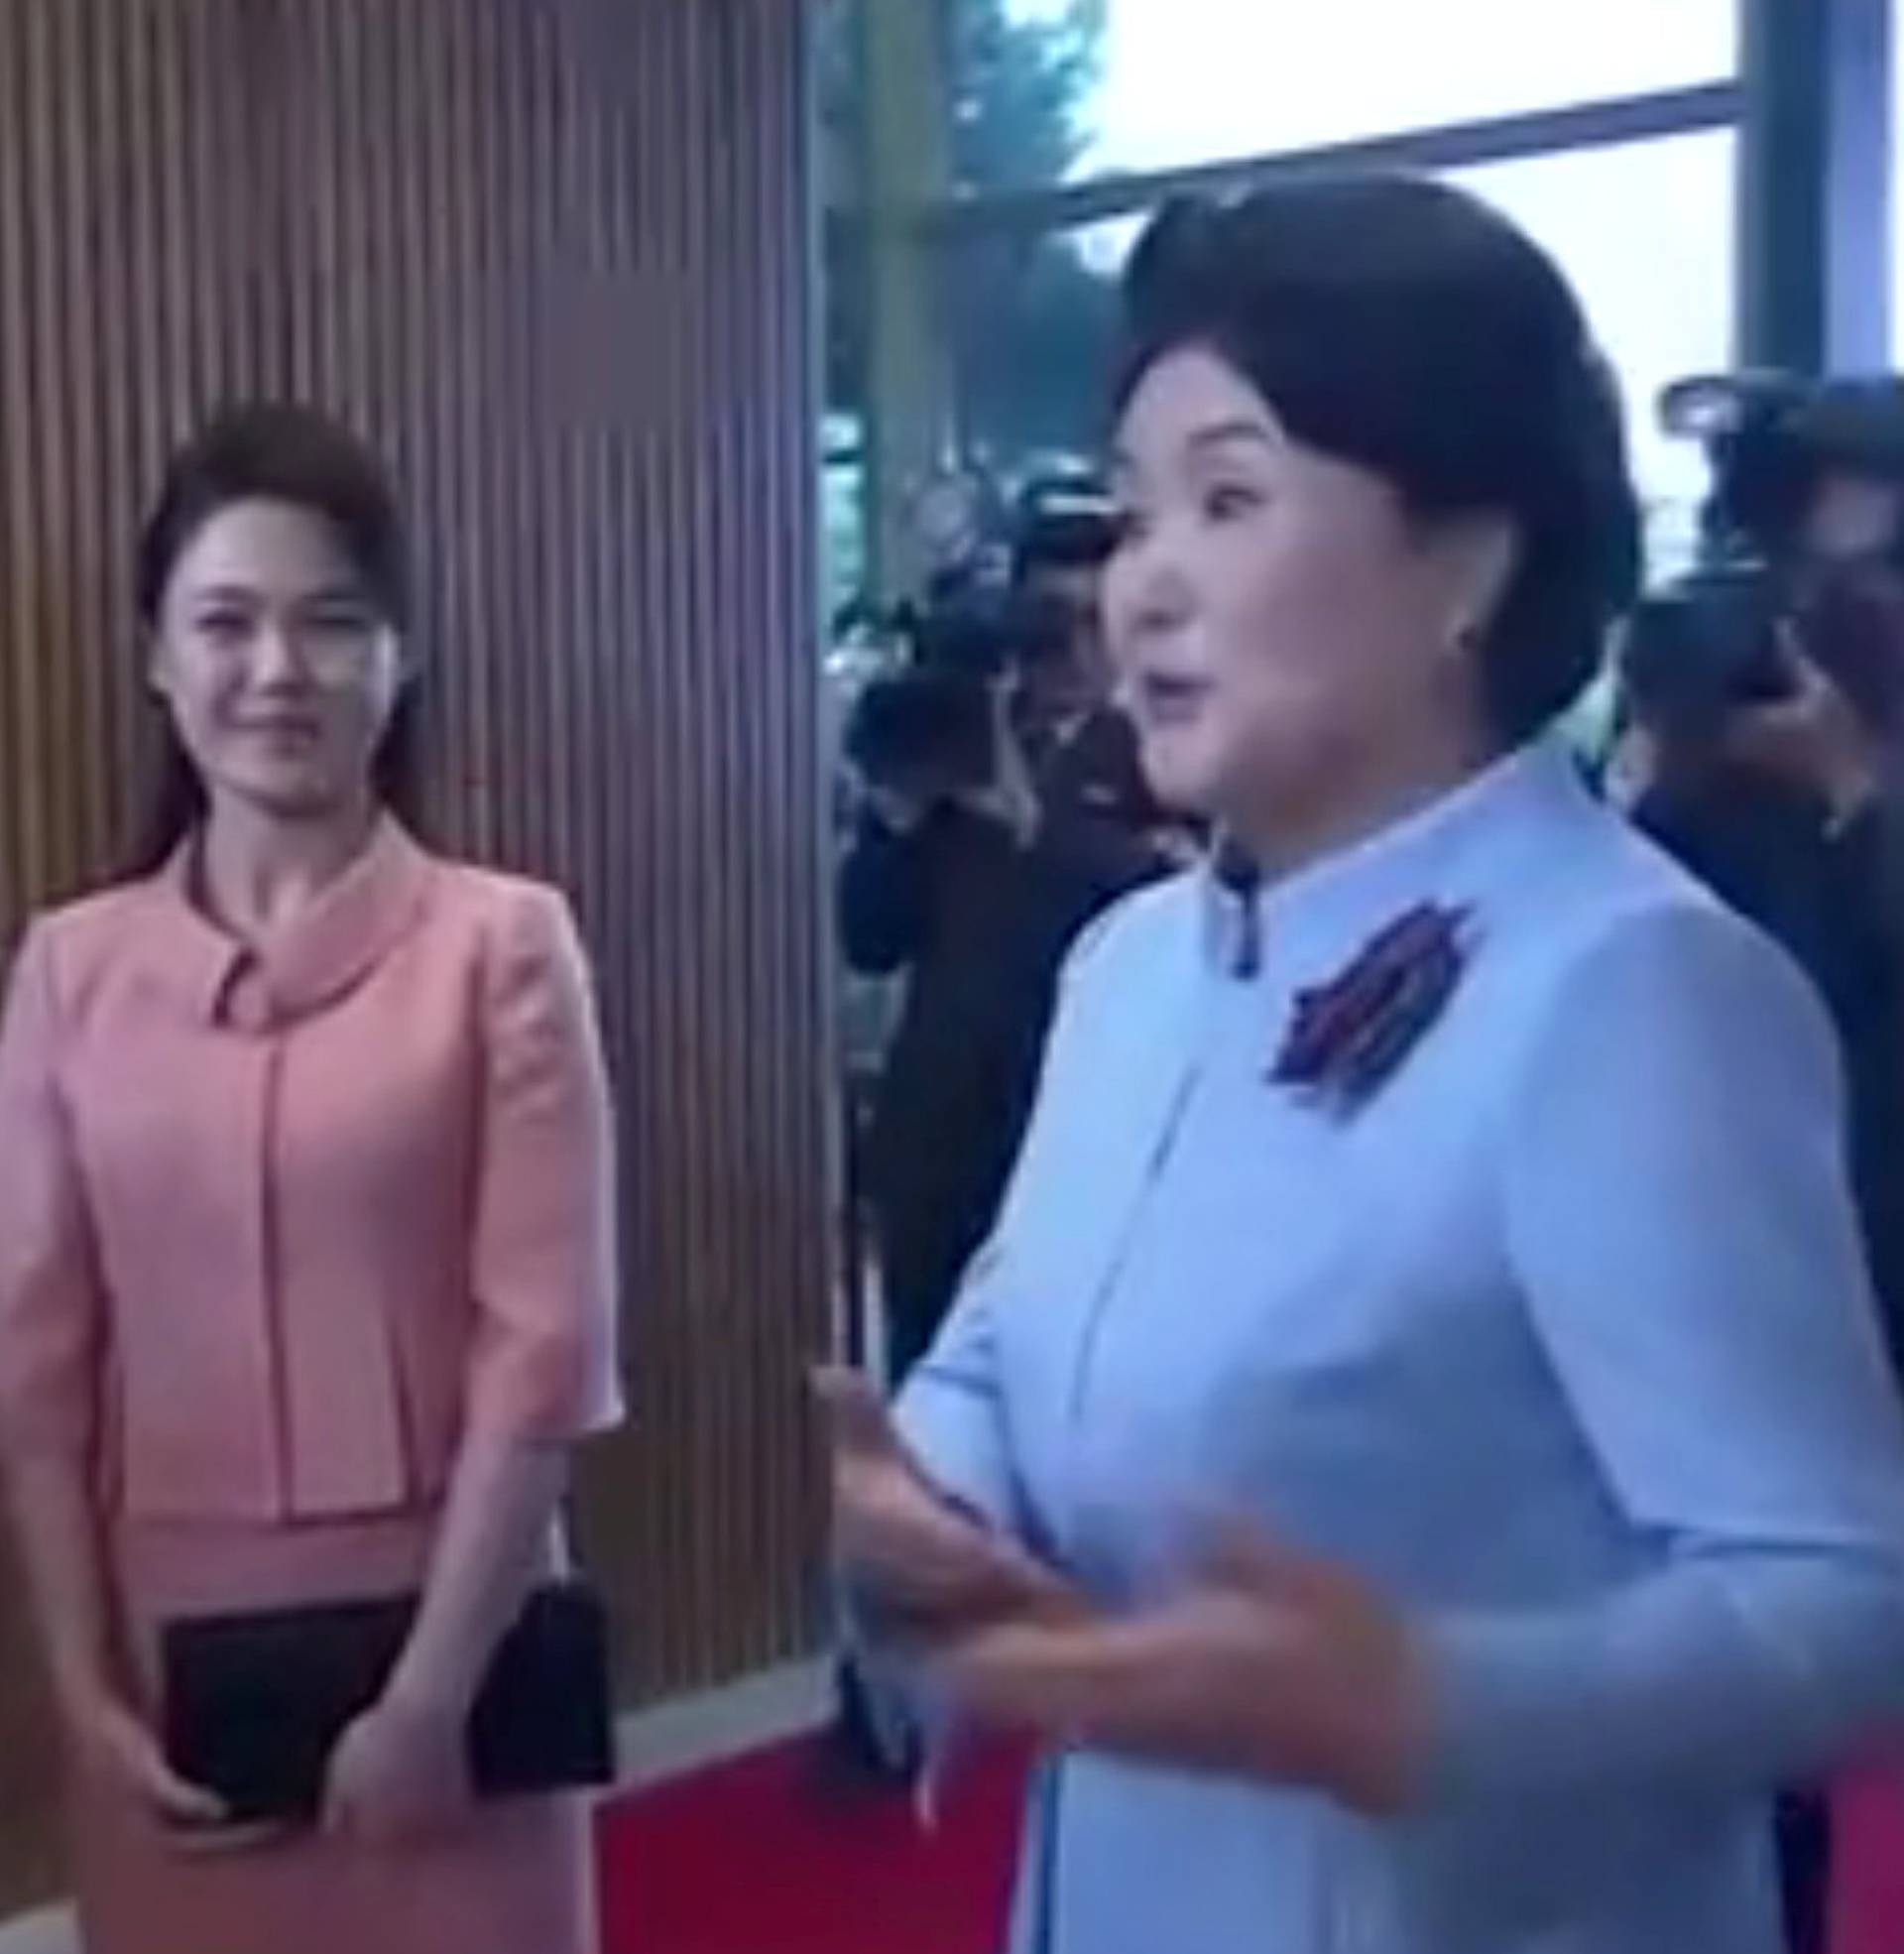 North Korean leader Kim Jong Un's wife, Ri Sol Ju, arrives to join the inter-Korea dinner at the truce village of Panmunjom